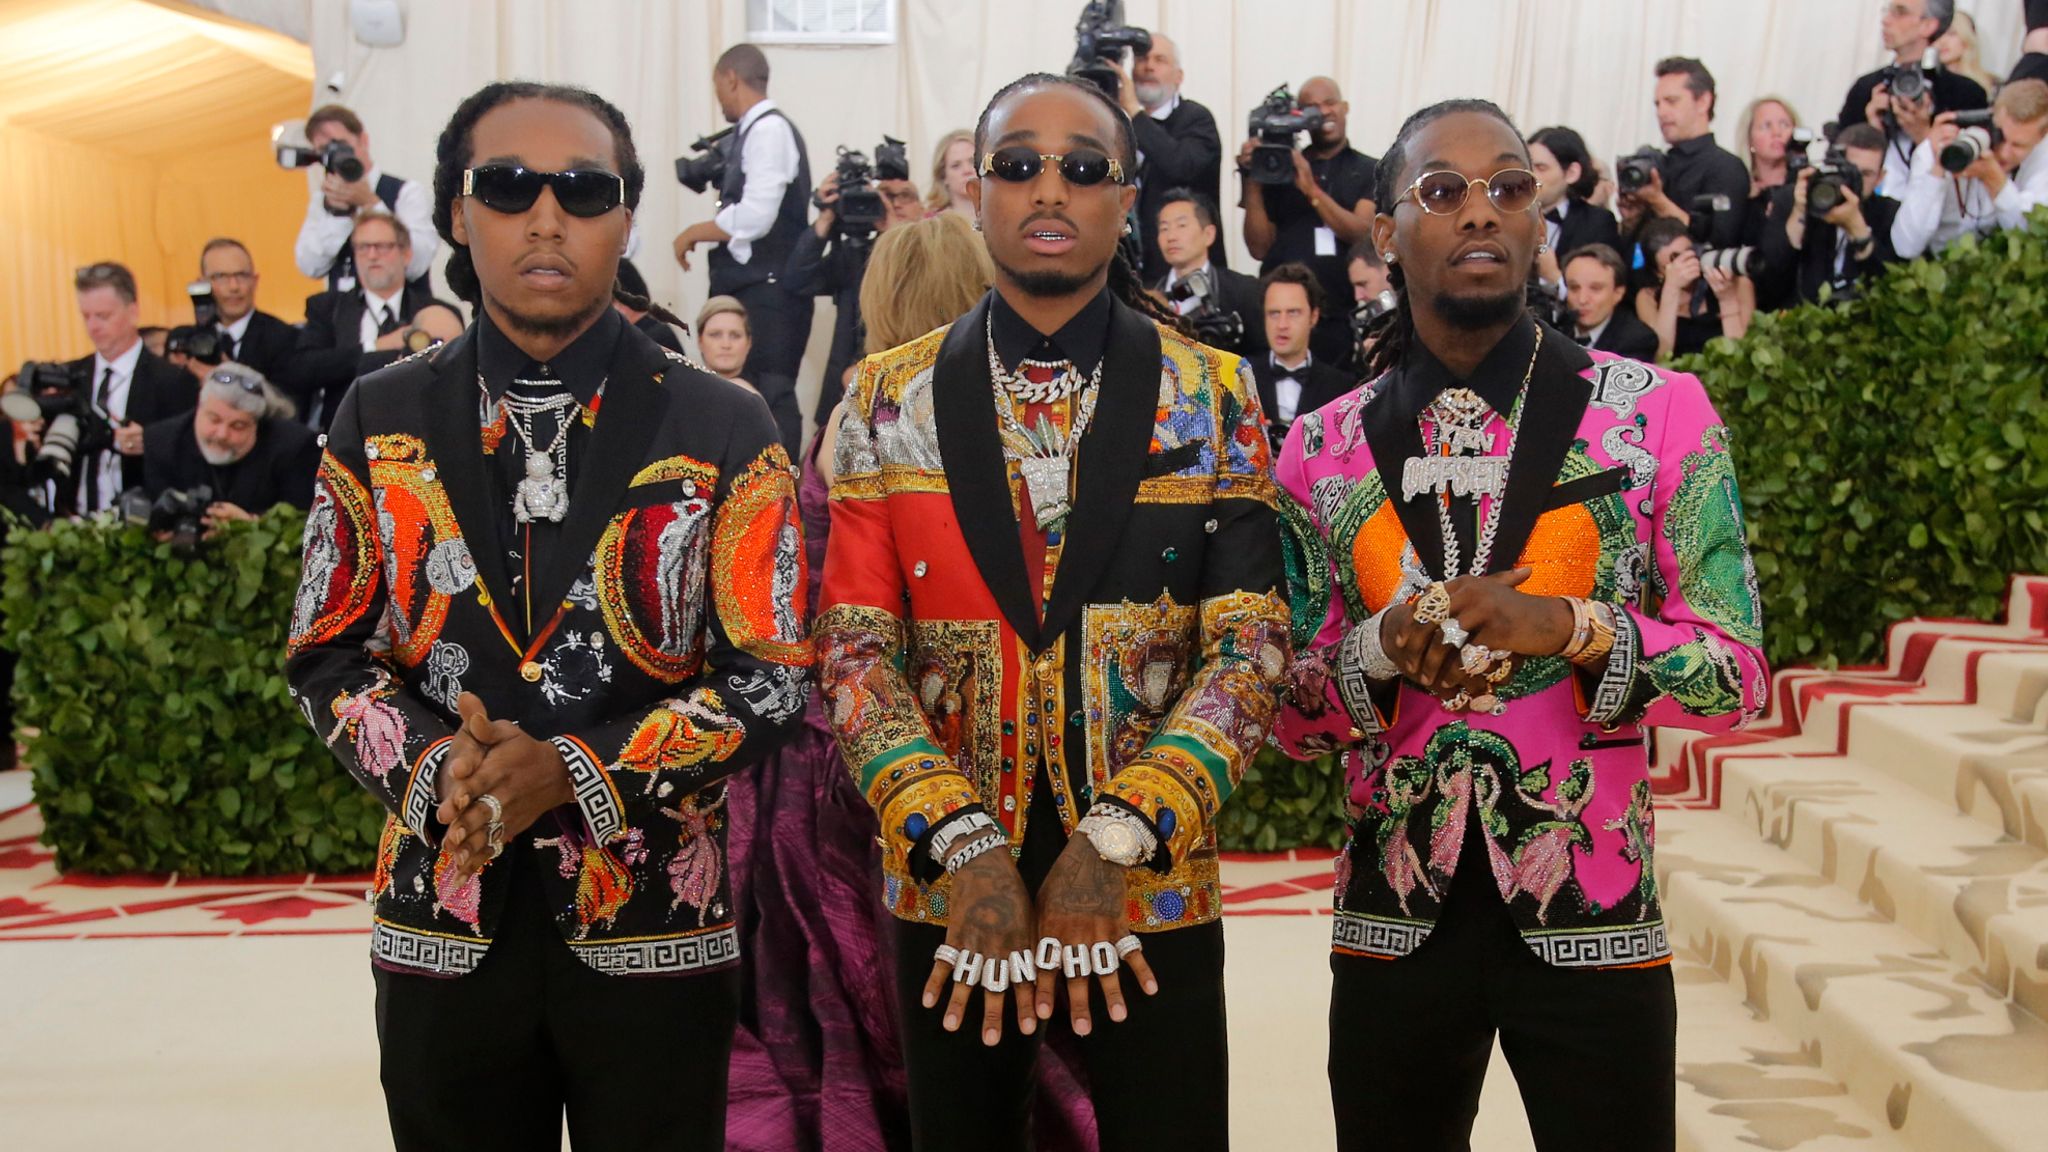 (L-R) Offset, Quavo, and Takeoff of Migos arrive at the Metropolitan Museum of Art Costume Institute Gala